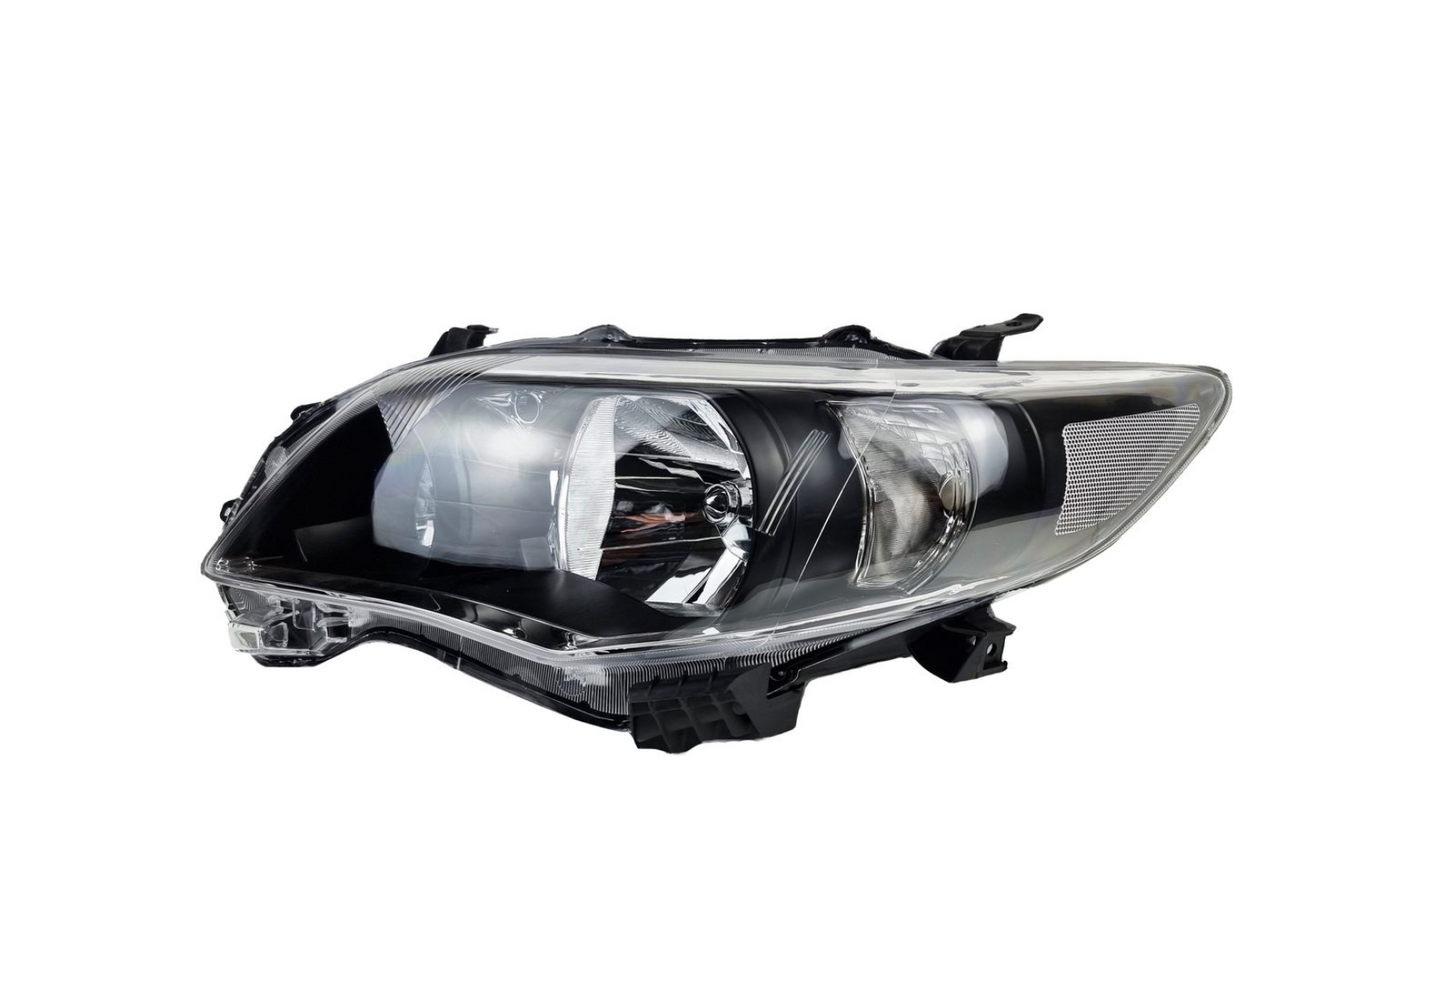 TOYOTA COROLLA QUEST HEADLIGHT SILVER AND BLACK LHS (NON OEM)